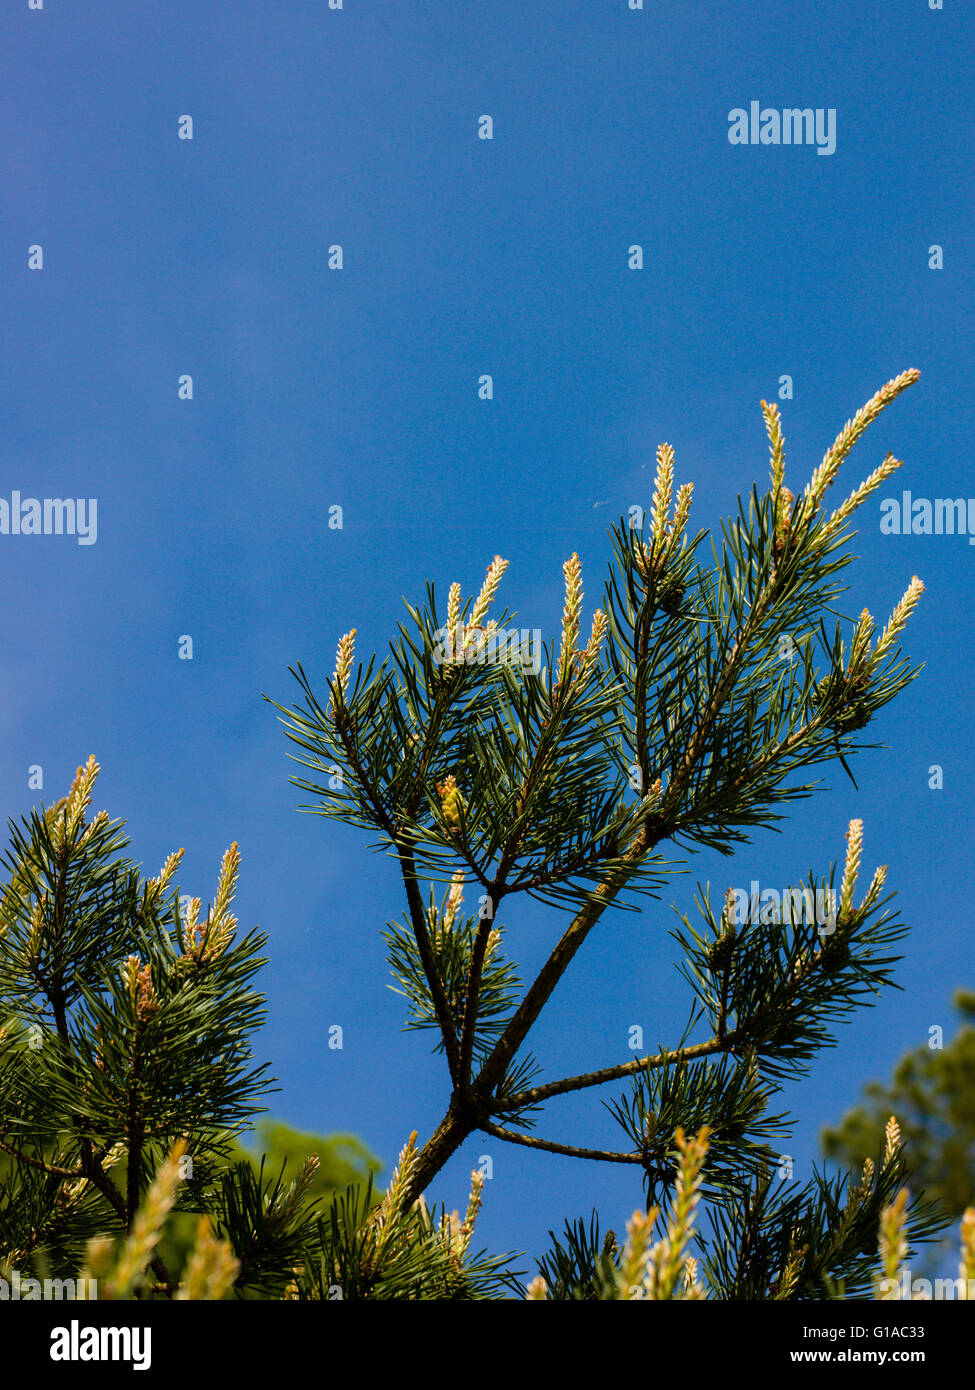 Scotch Pine Tree With New Young Pine Cones Developing Against a Clear Blue Spring Sky Stock Photo